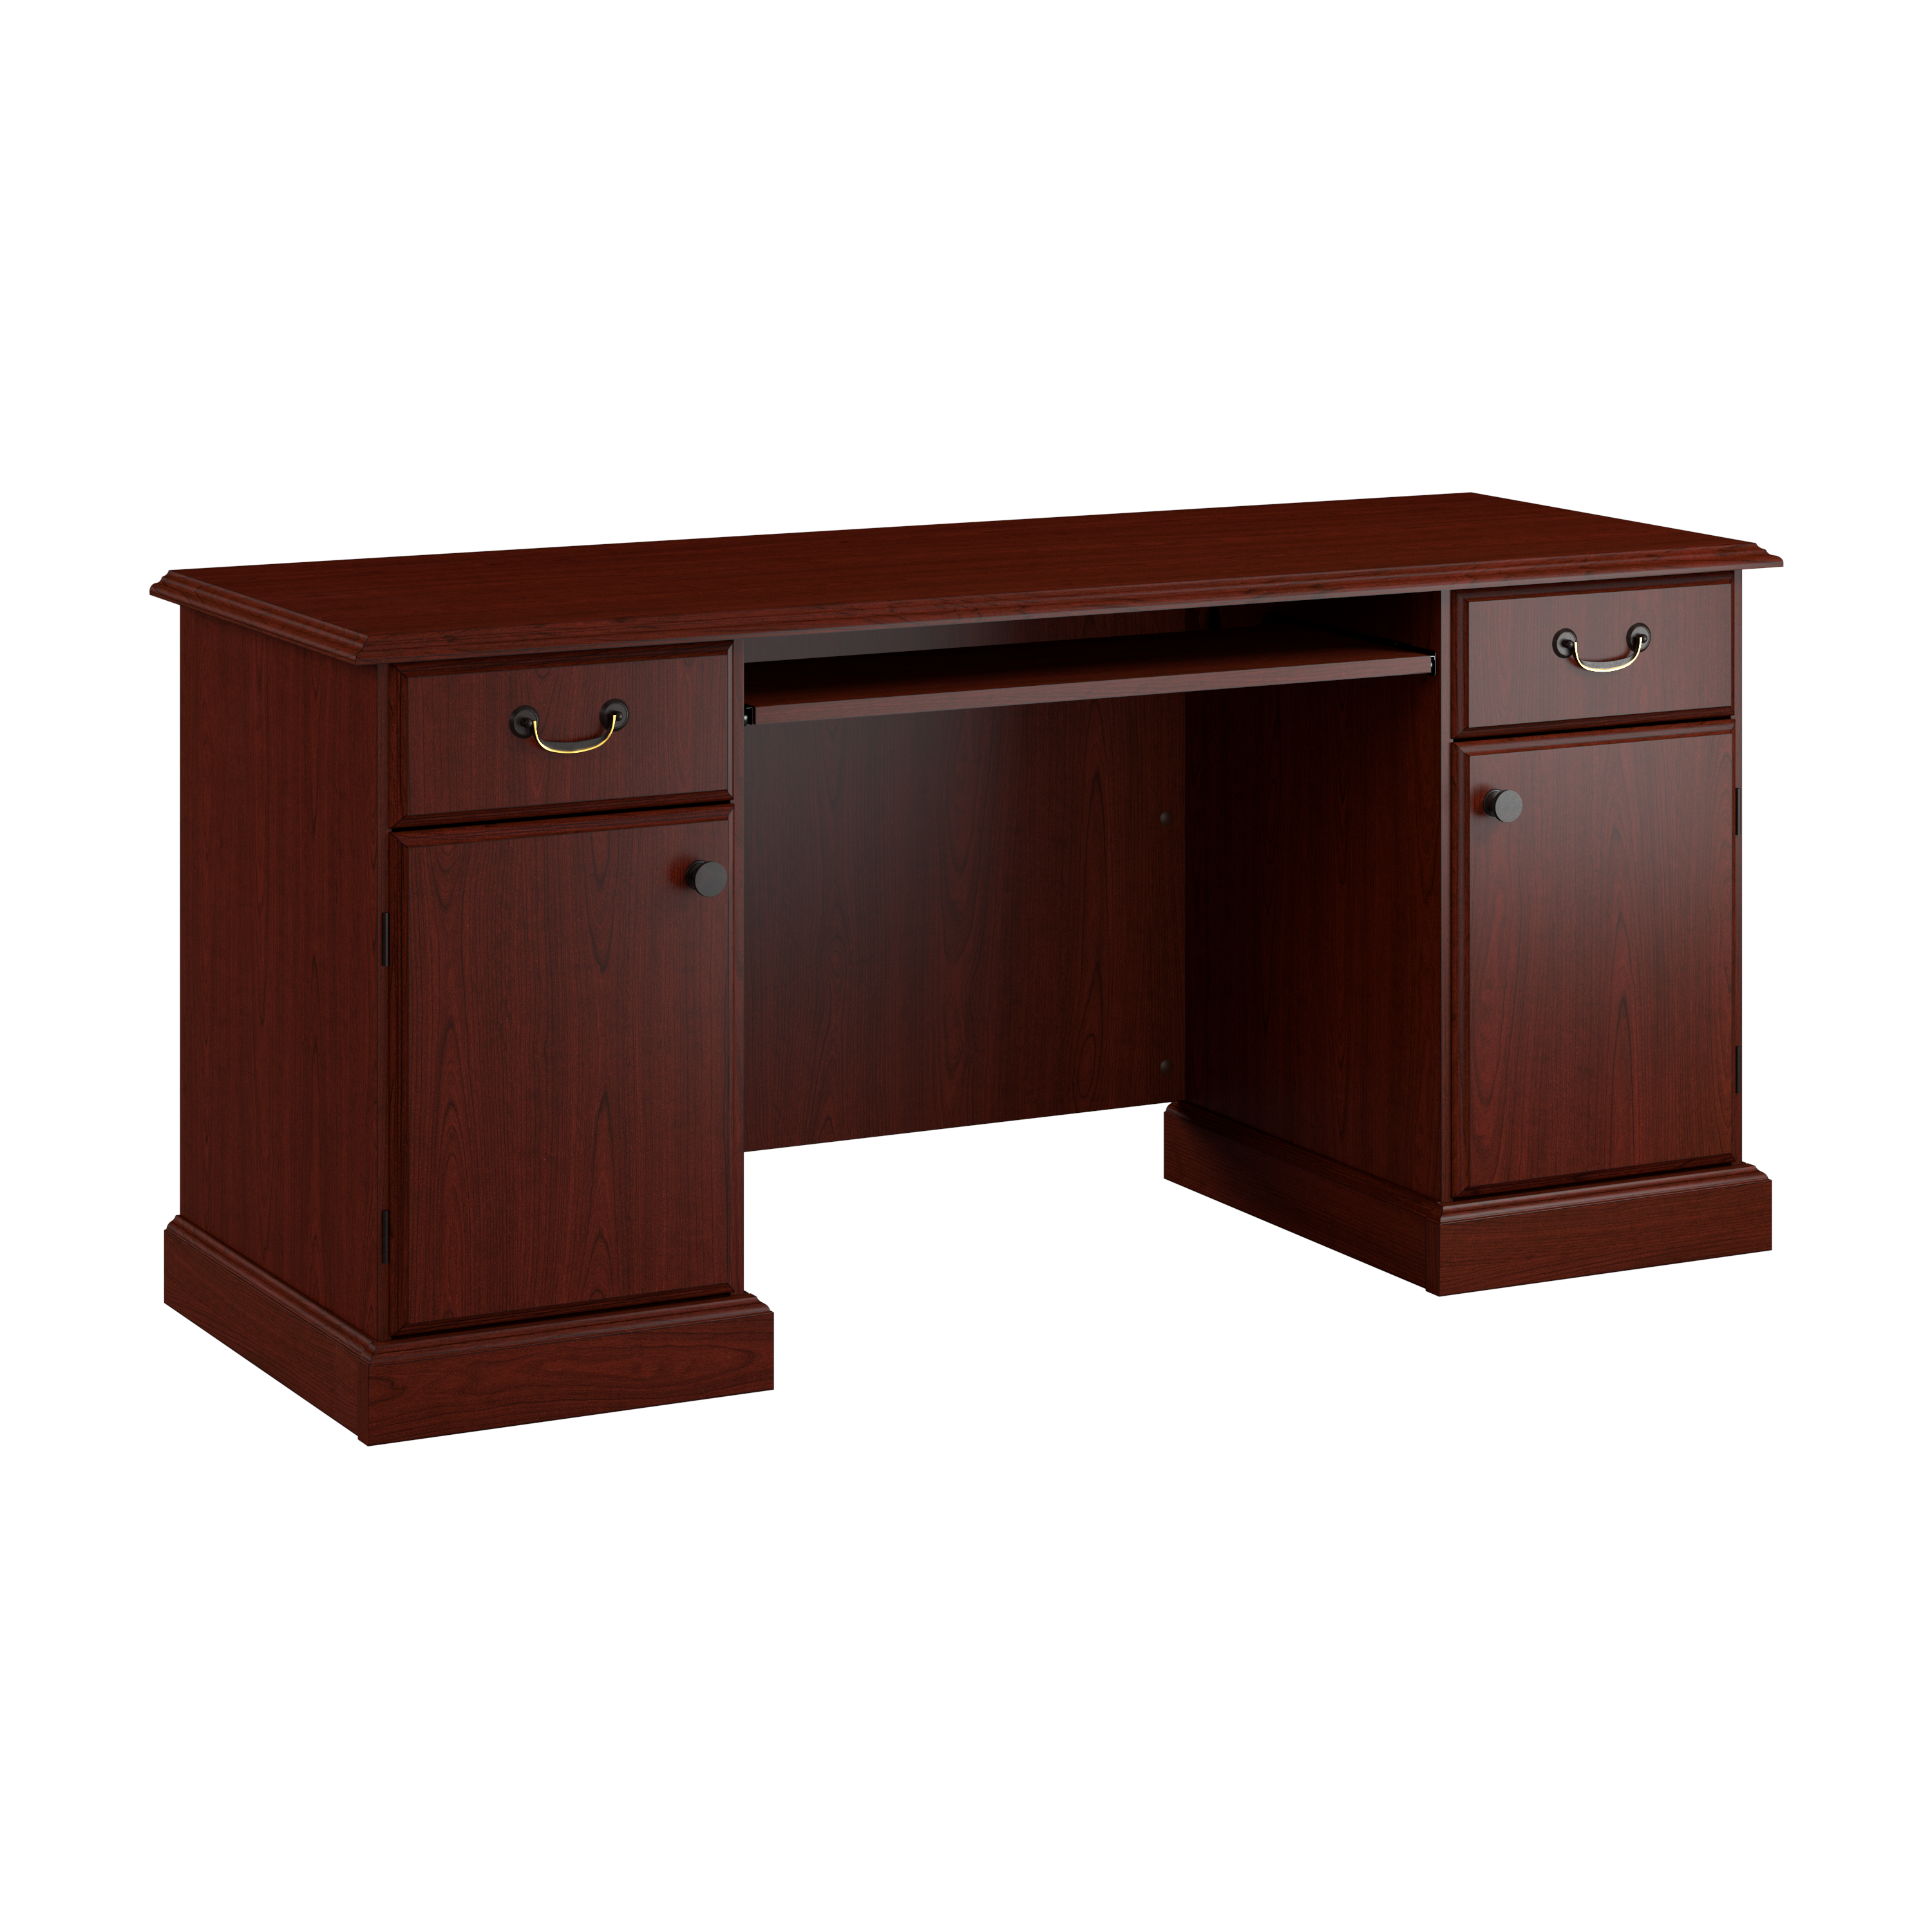 Shop Bush Business Furniture Arlington Computer Desk with Storage and Keyboard Tray 02 WC65510-03K #color_harvest cherry